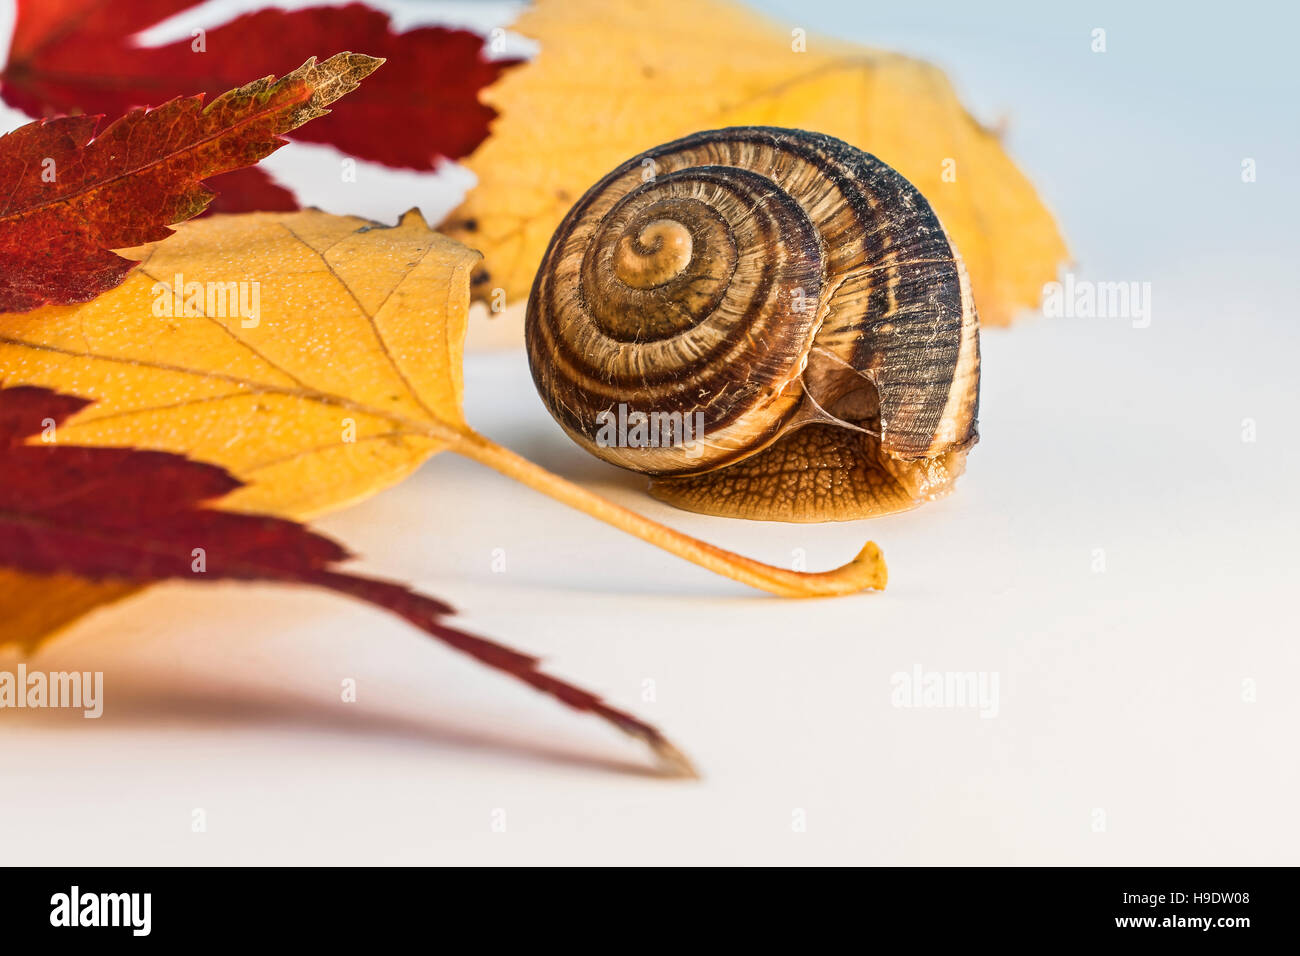 Snail with Leaf of Japanese Maple and Other Leaves Stock Photo